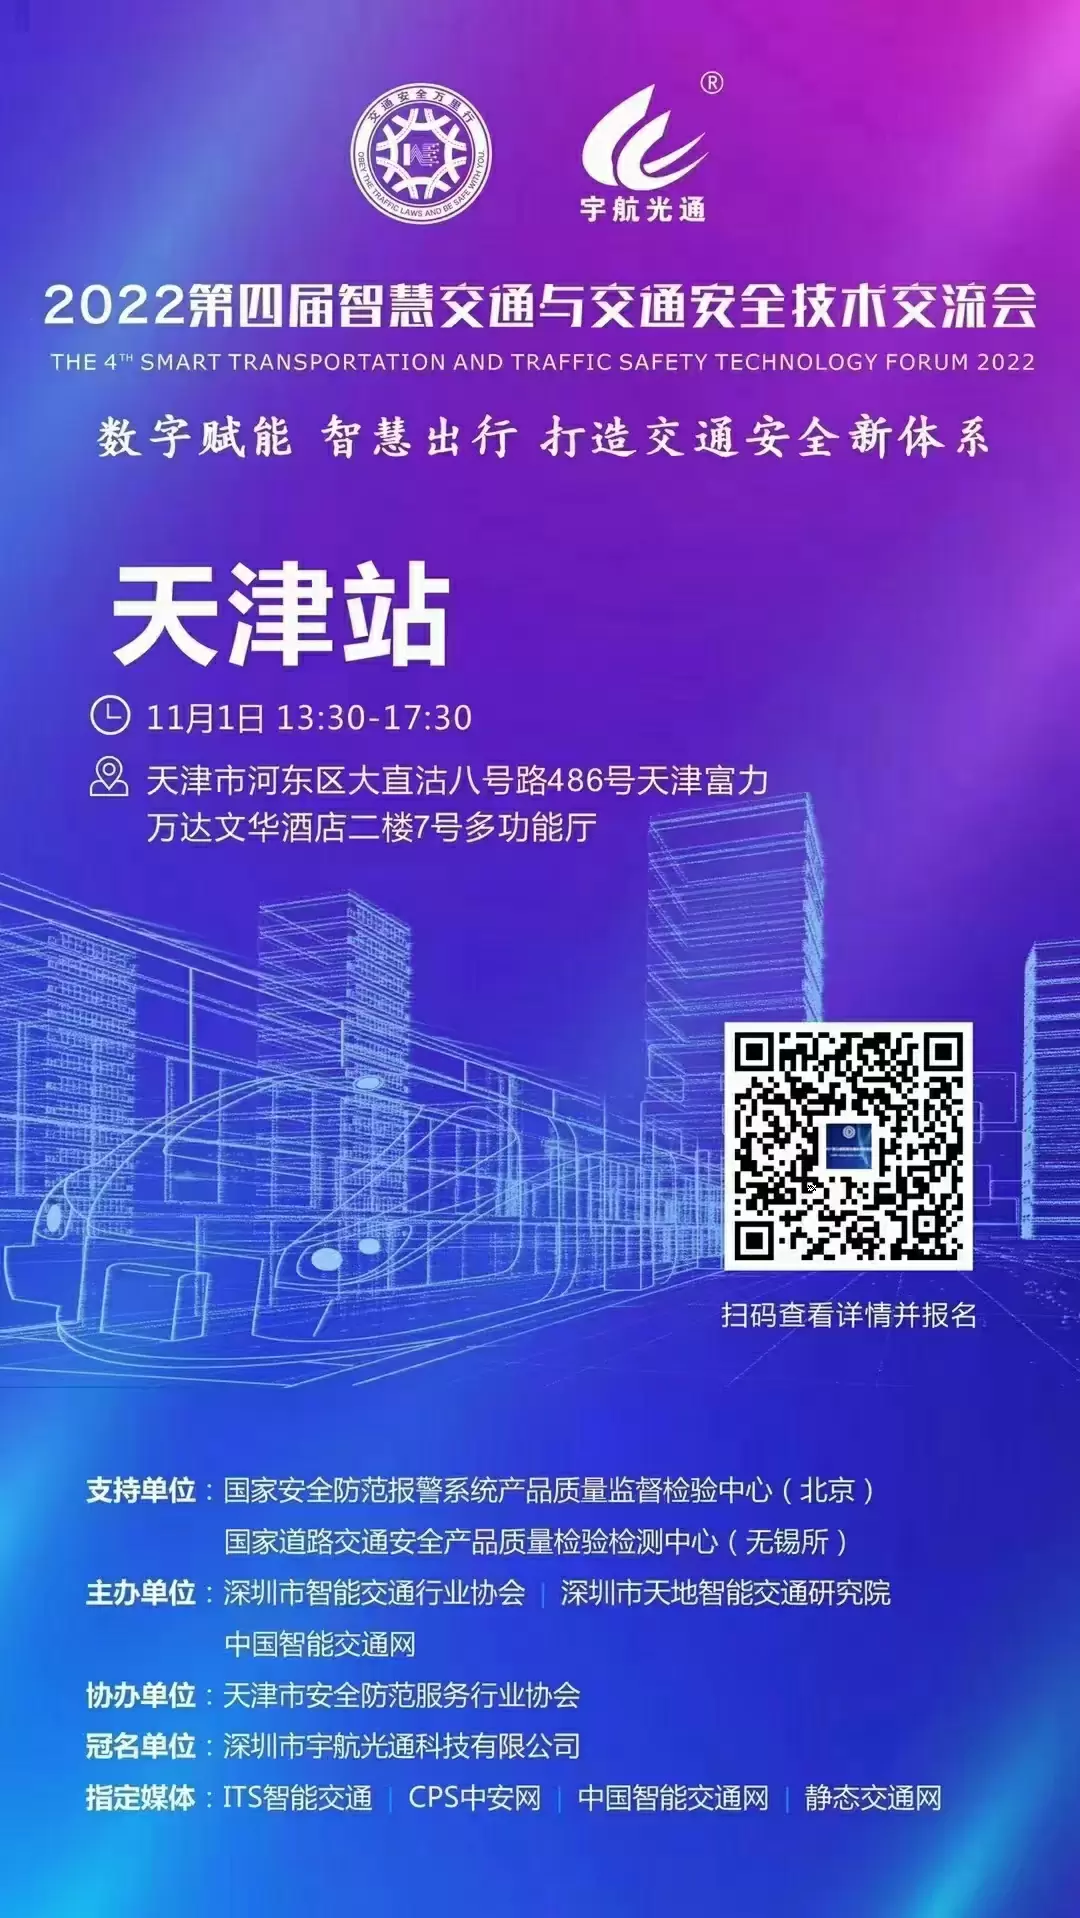 THE 4th SMART TRANSPORTATION AND TRAFFIC SAFETY TECHNOLOGY FORUM 2022 - TIAN JIN STATION